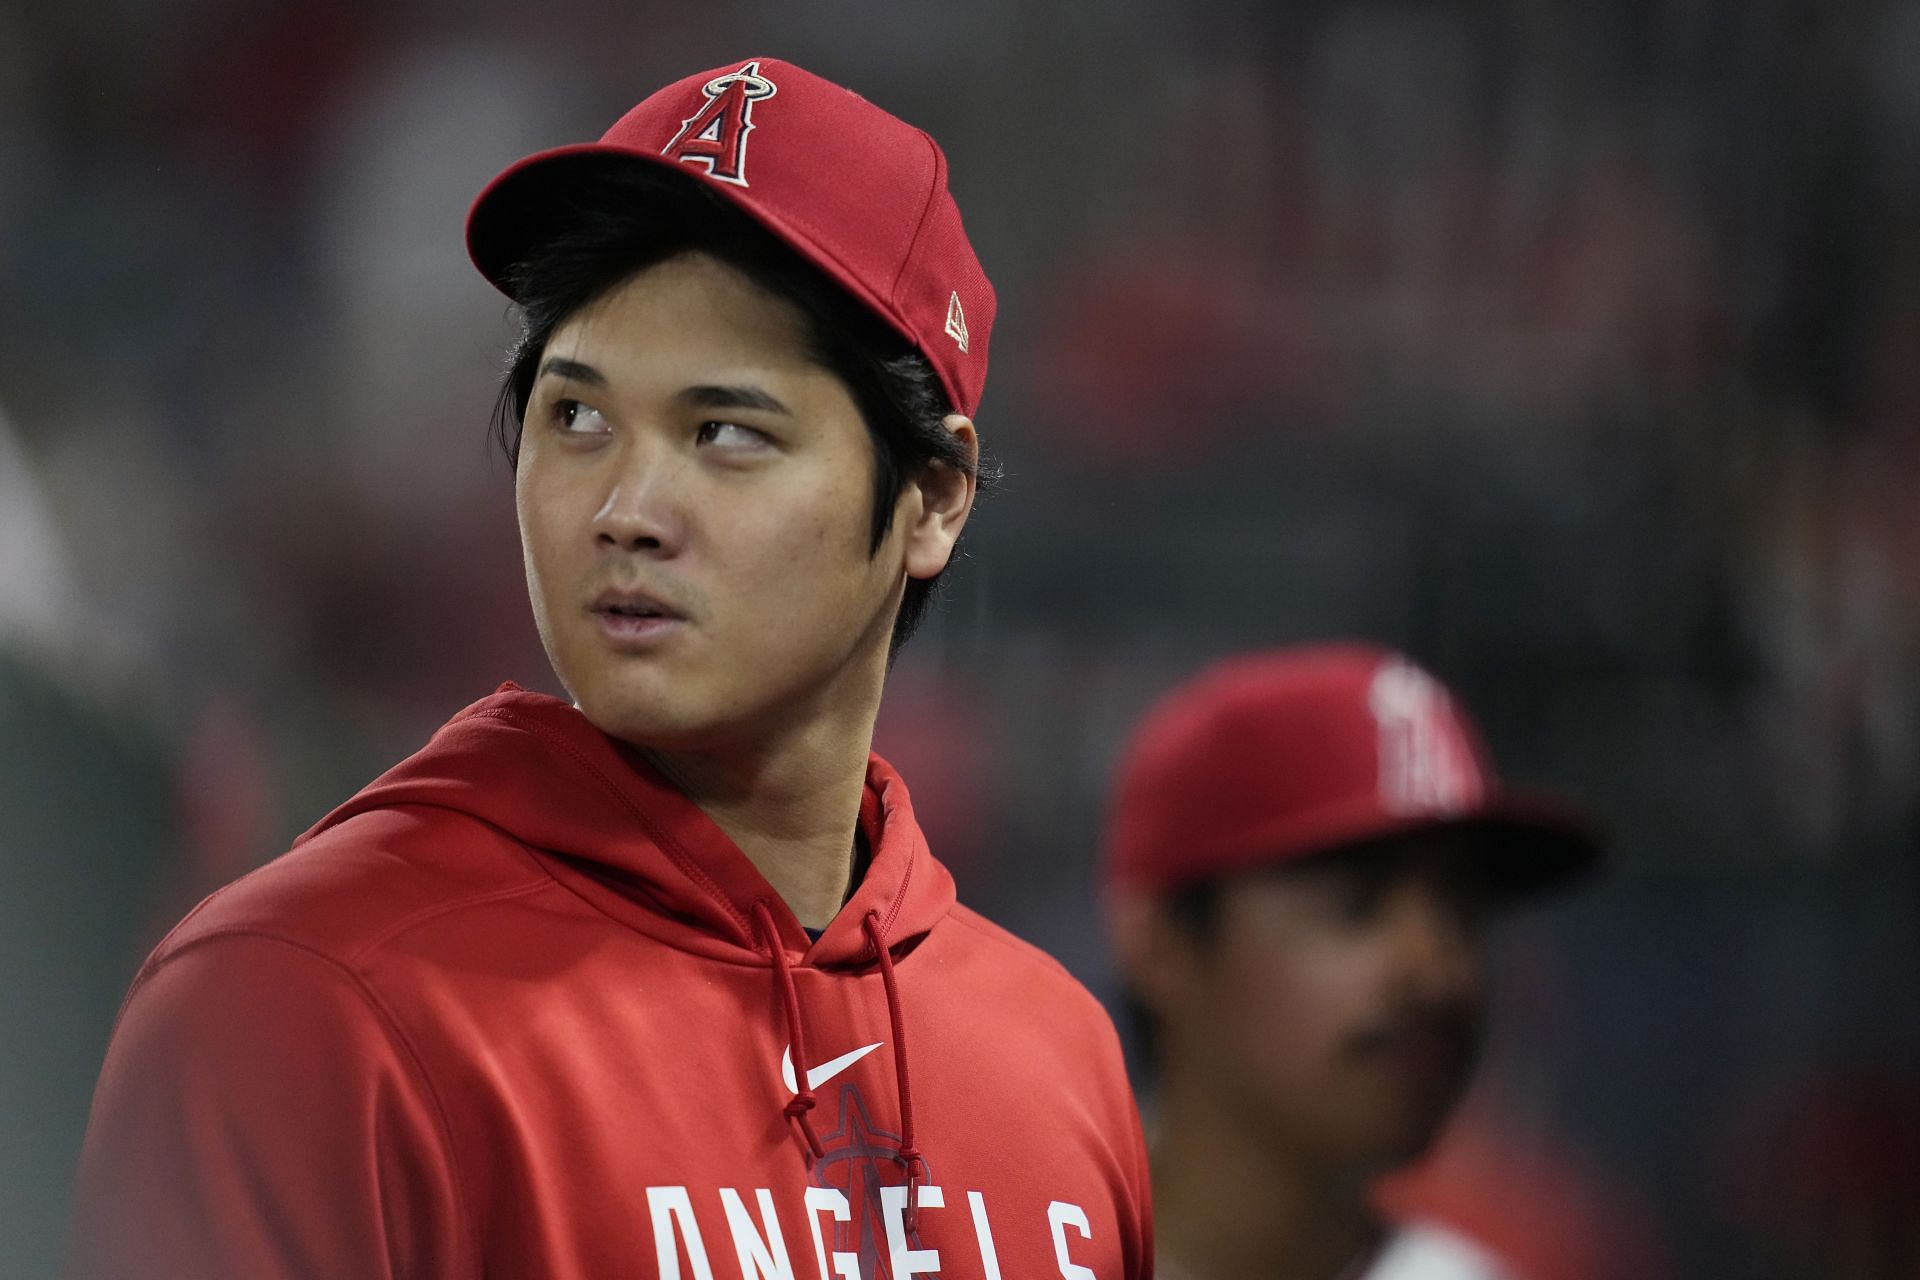 The LA Dodgers are currently frontrunners in the chase for Shohei Ohtani.